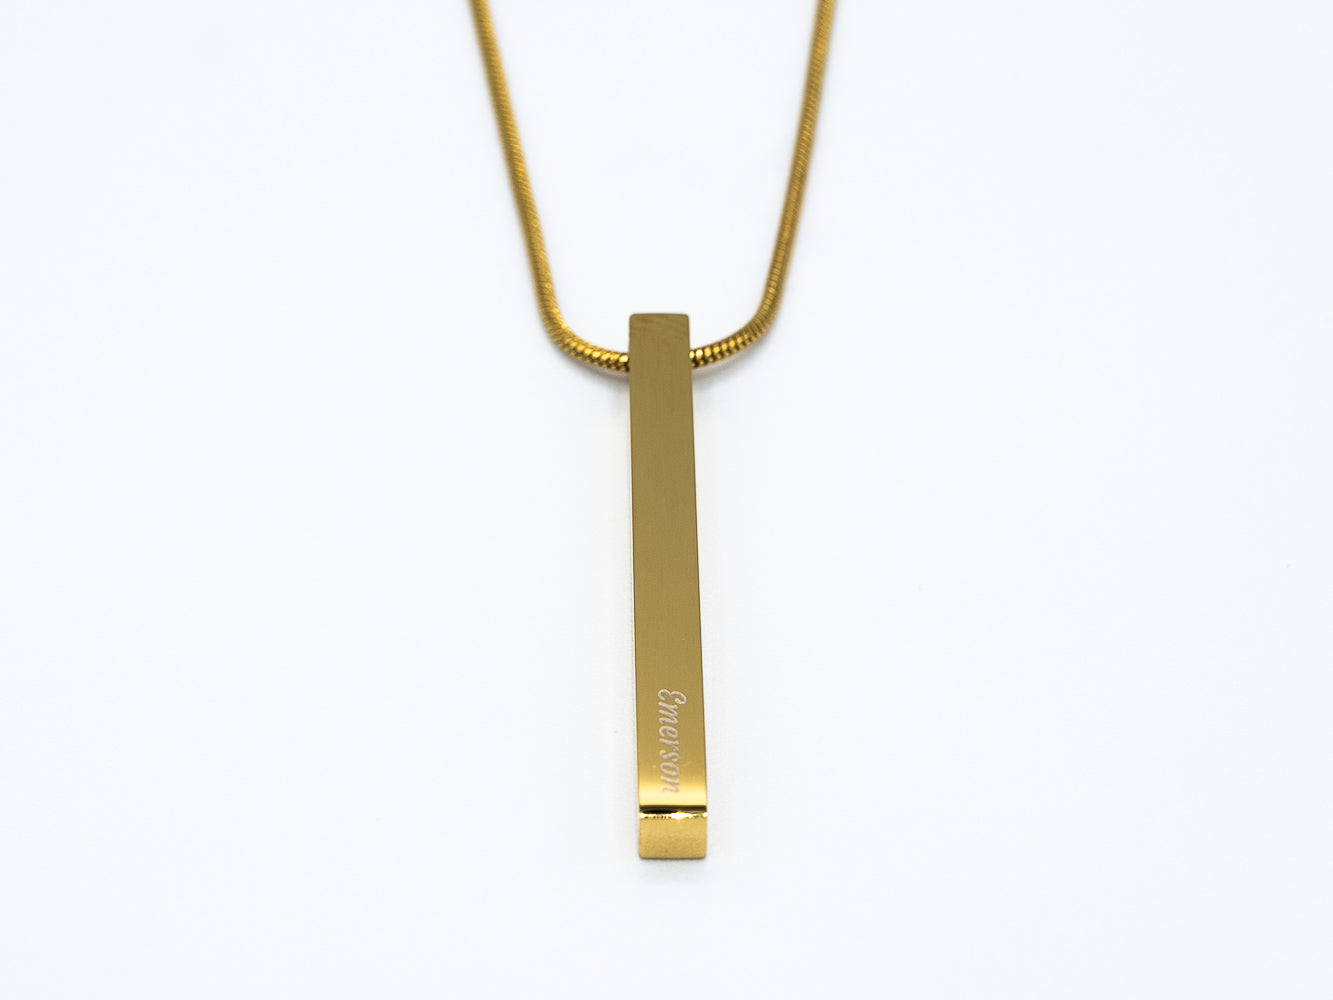 The Emerson Bar Necklace